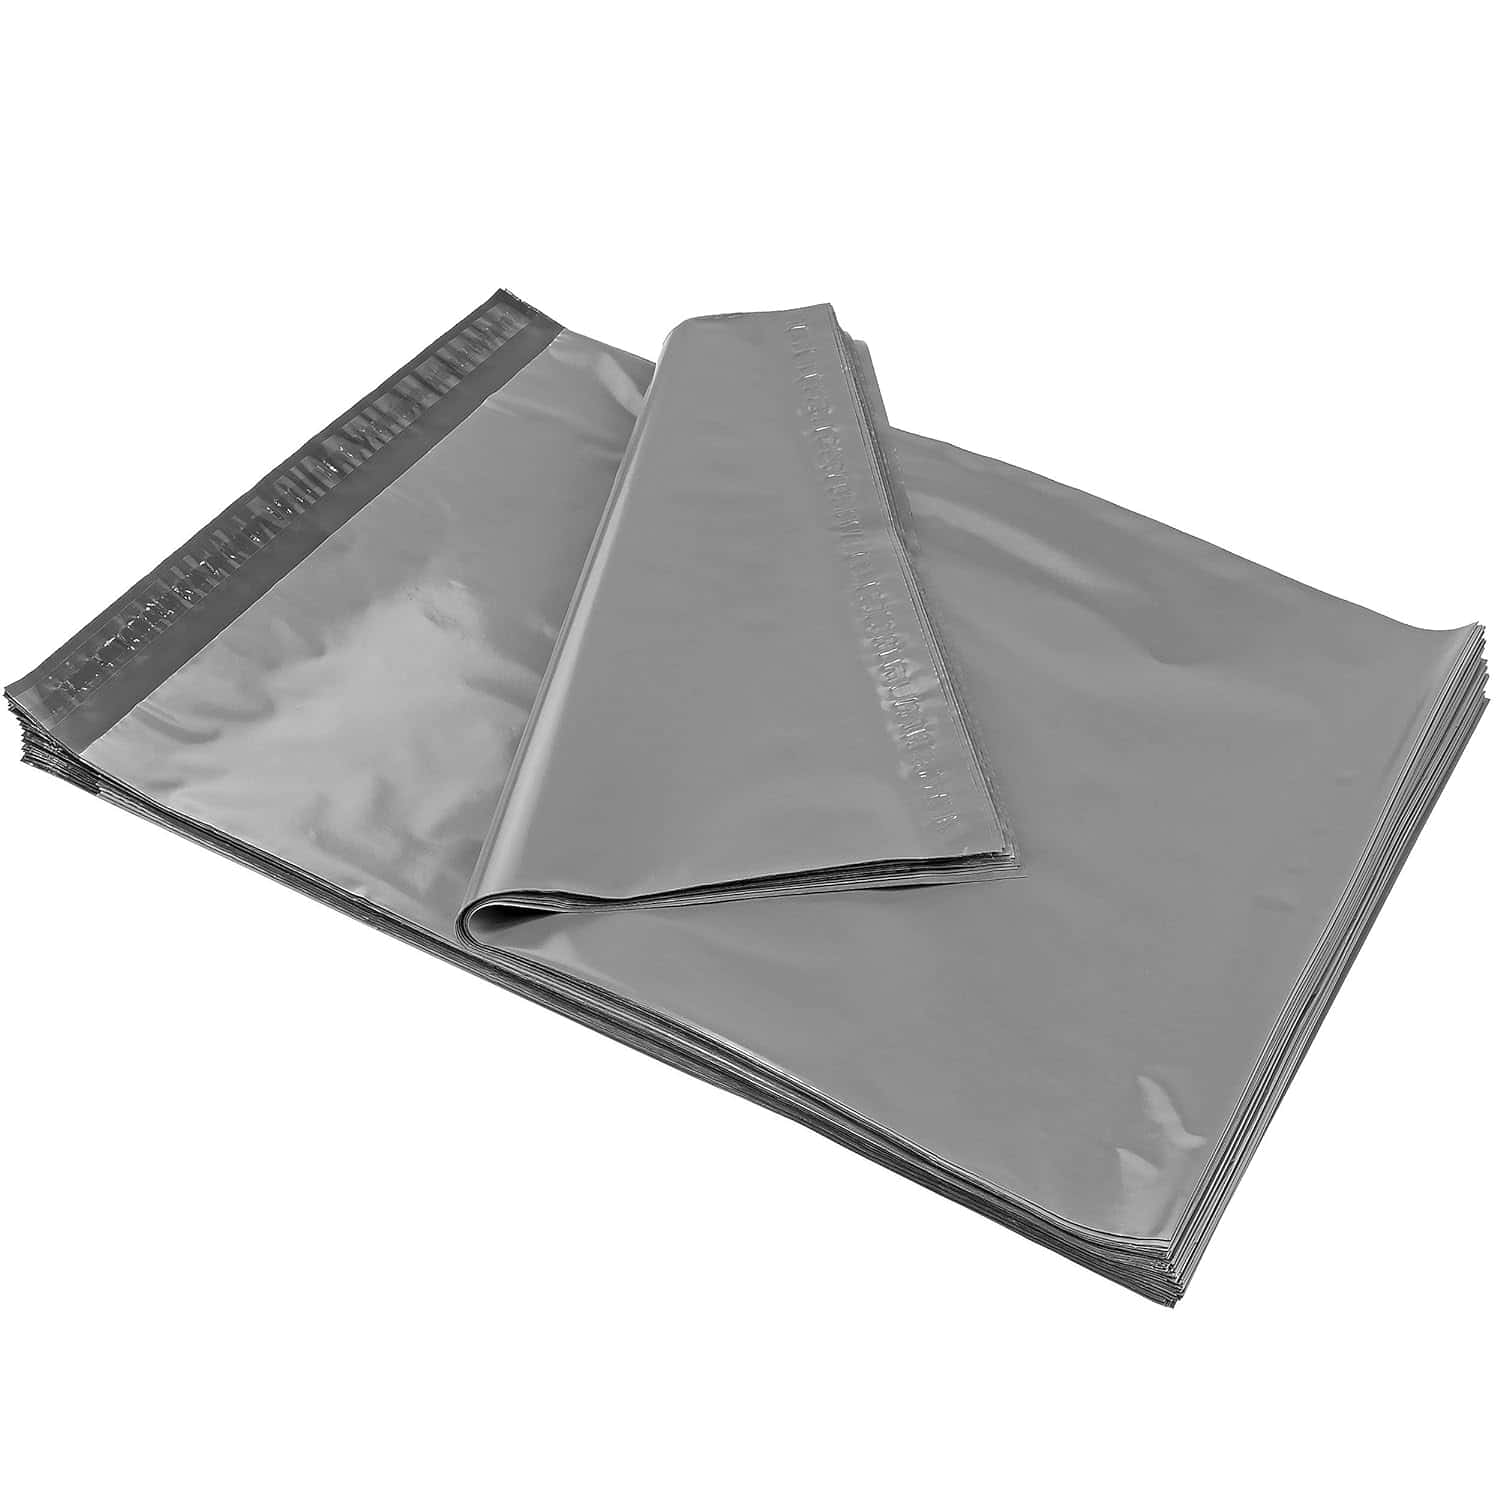 450mm x 500mm Grey Plastic Poly Bags Courier Shipping